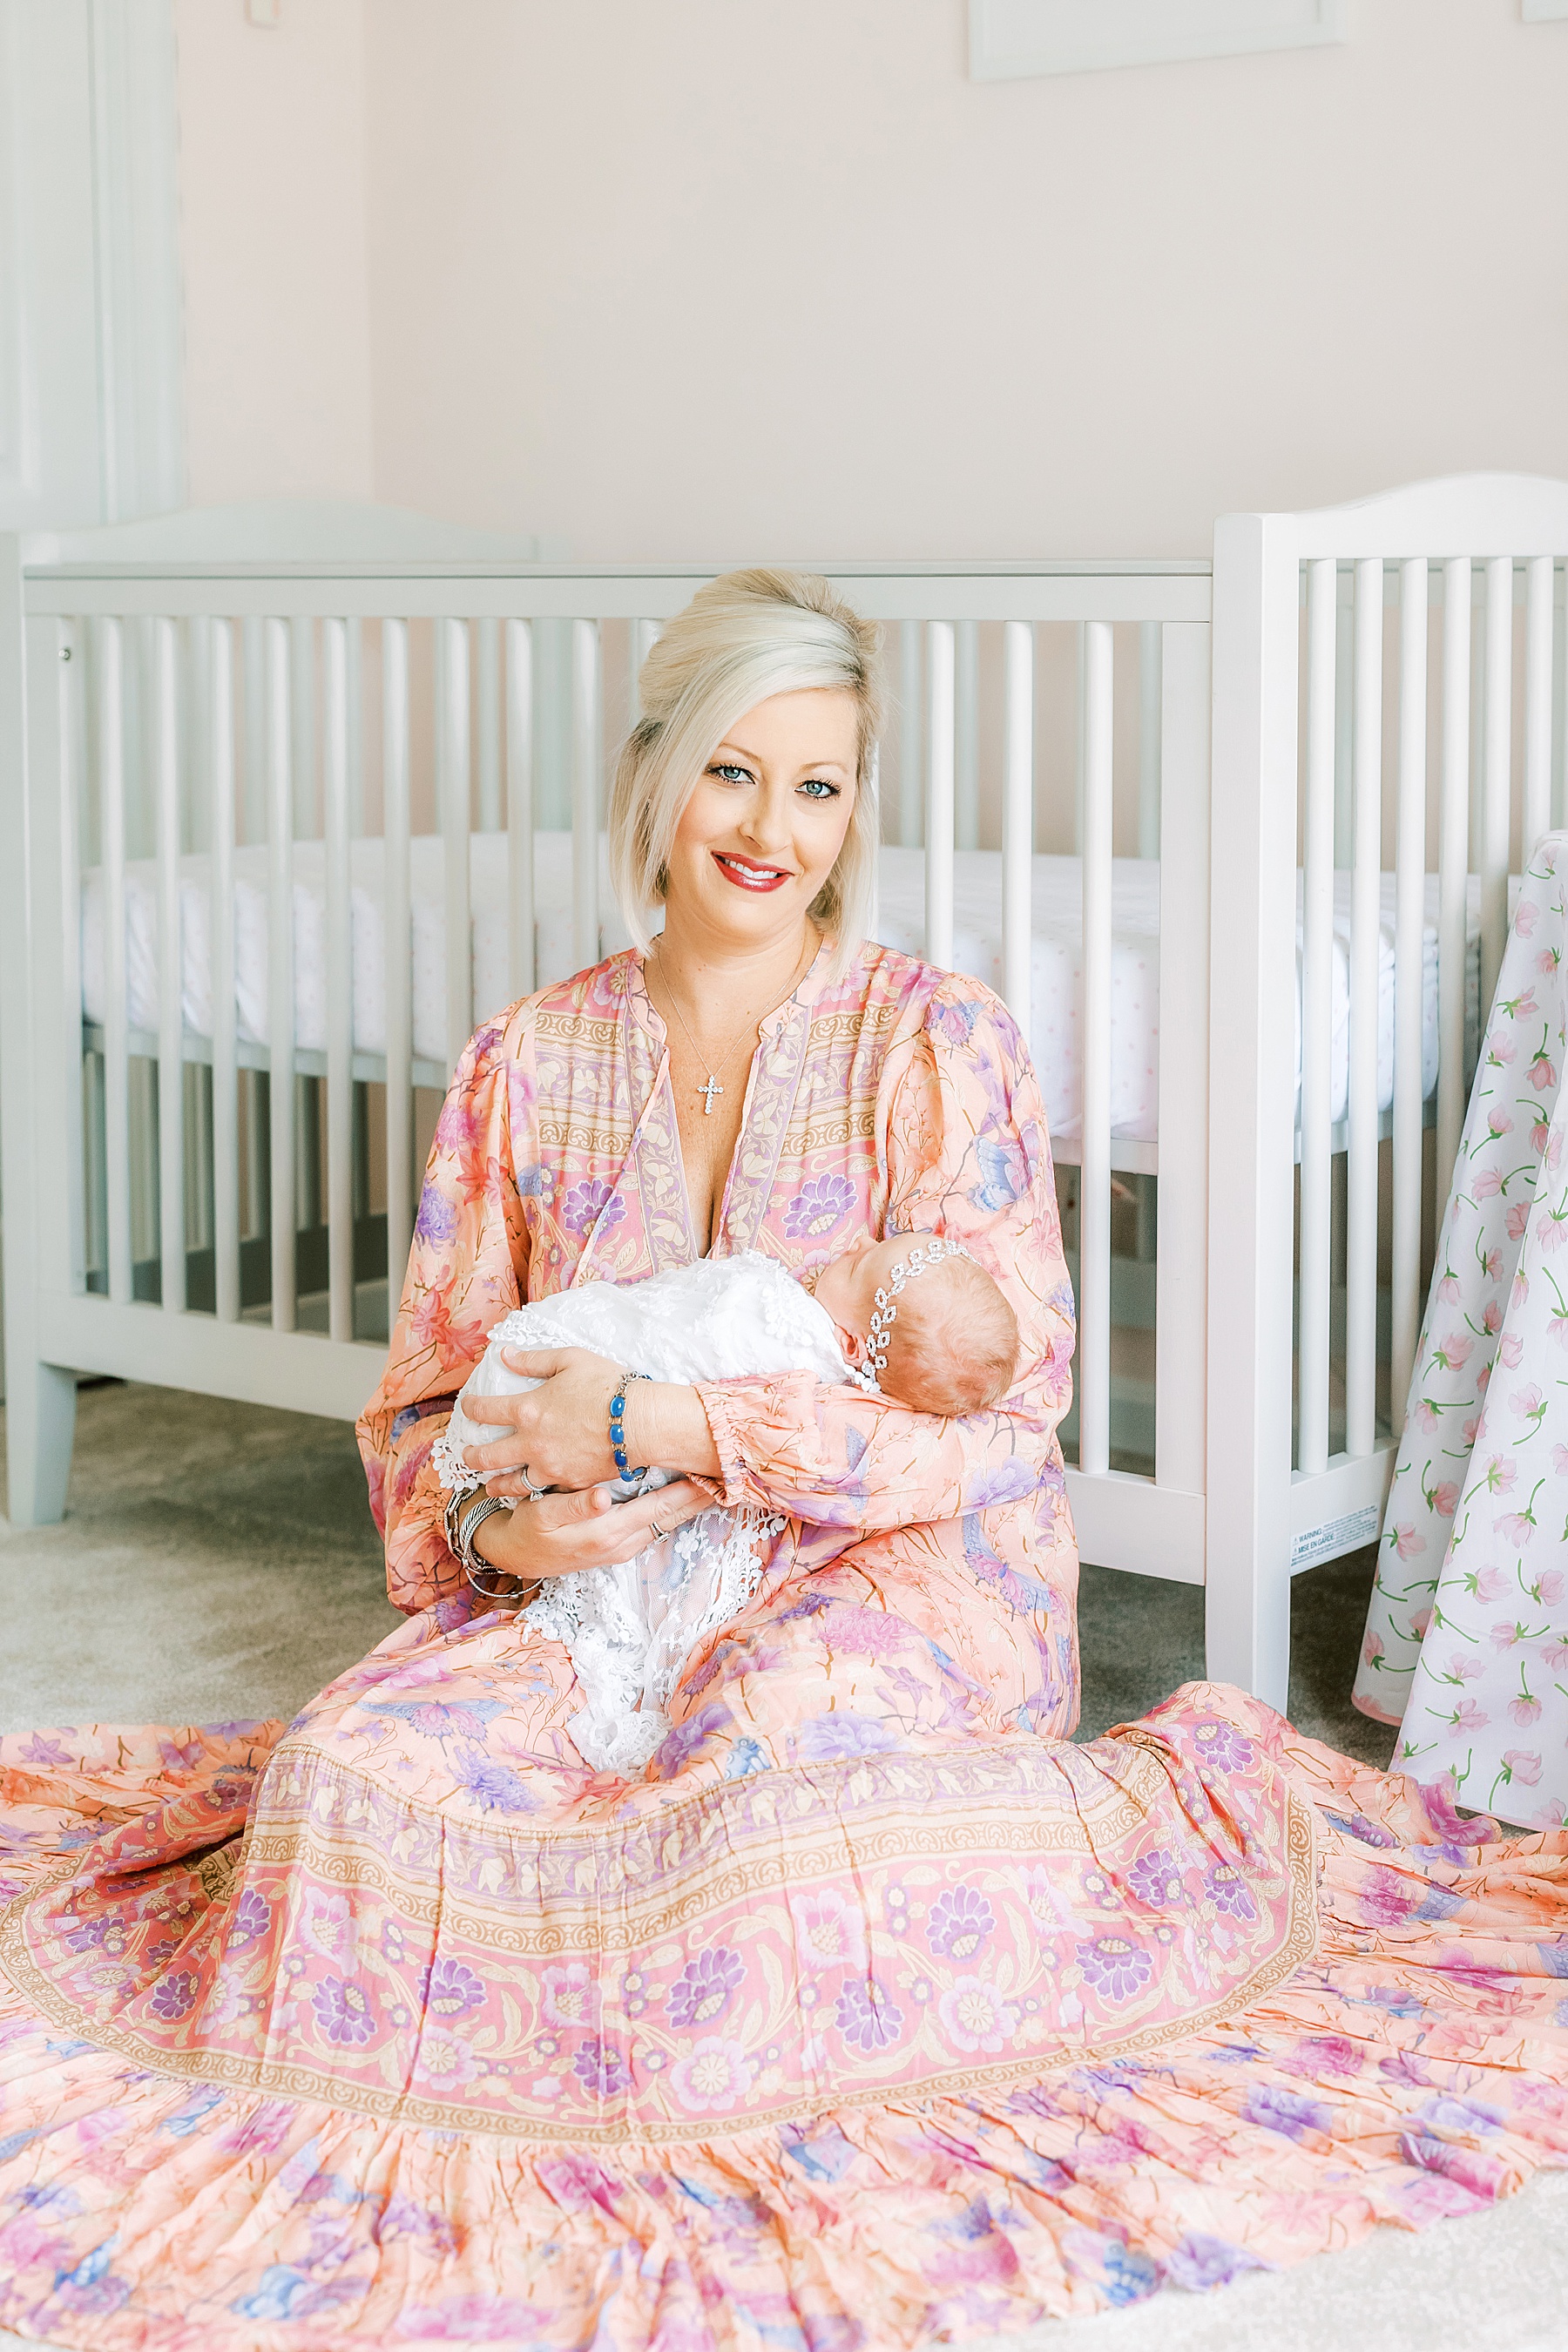 woman in pink dress holding newborn baby girl by white crib in nursery